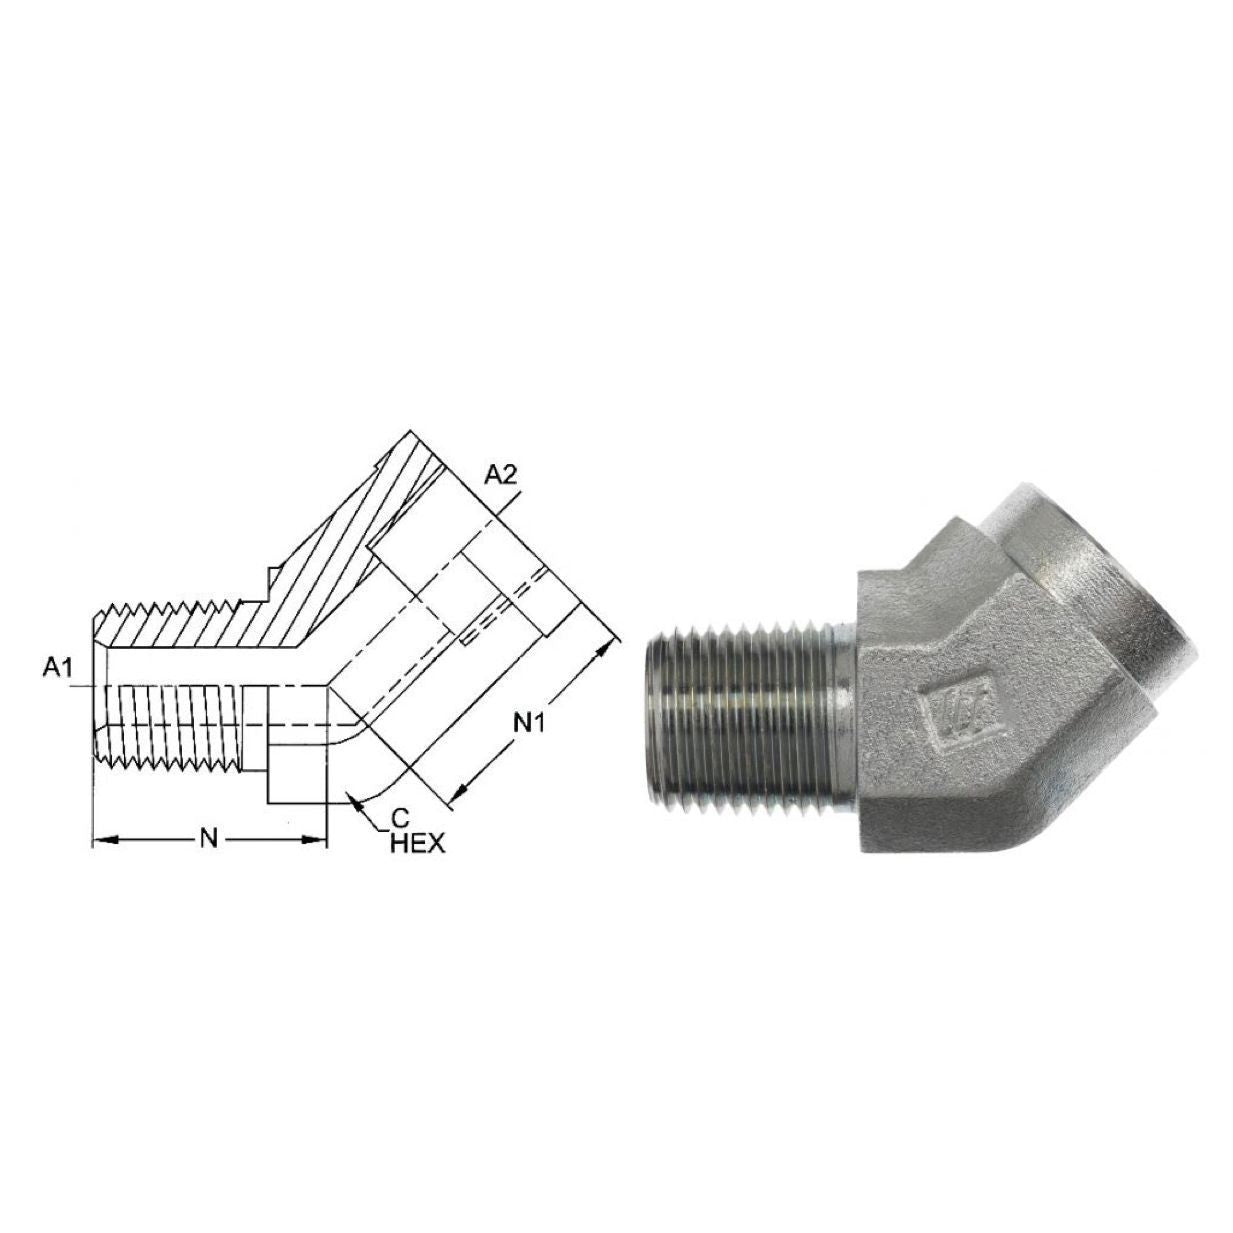 5503-12-12-SS : OneHydraulics 45-Degree Street Elbow, 0.75 (3/4) Male NPT x 0.75 (3/4) Female NPT, Stainless Steel, 4800psi